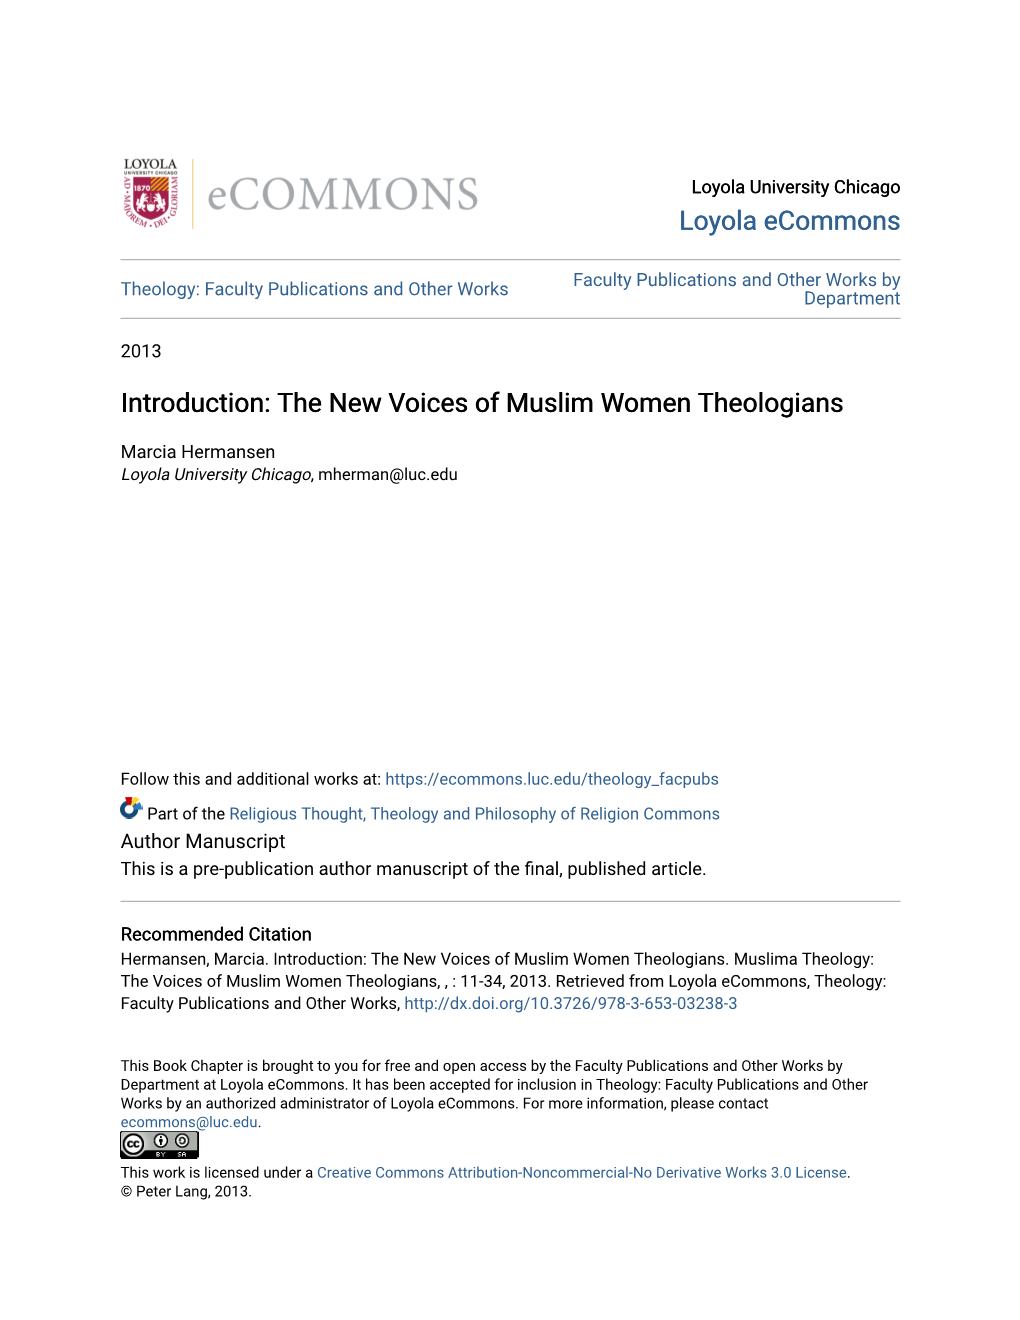 Introduction: the New Voices of Muslim Women Theologians